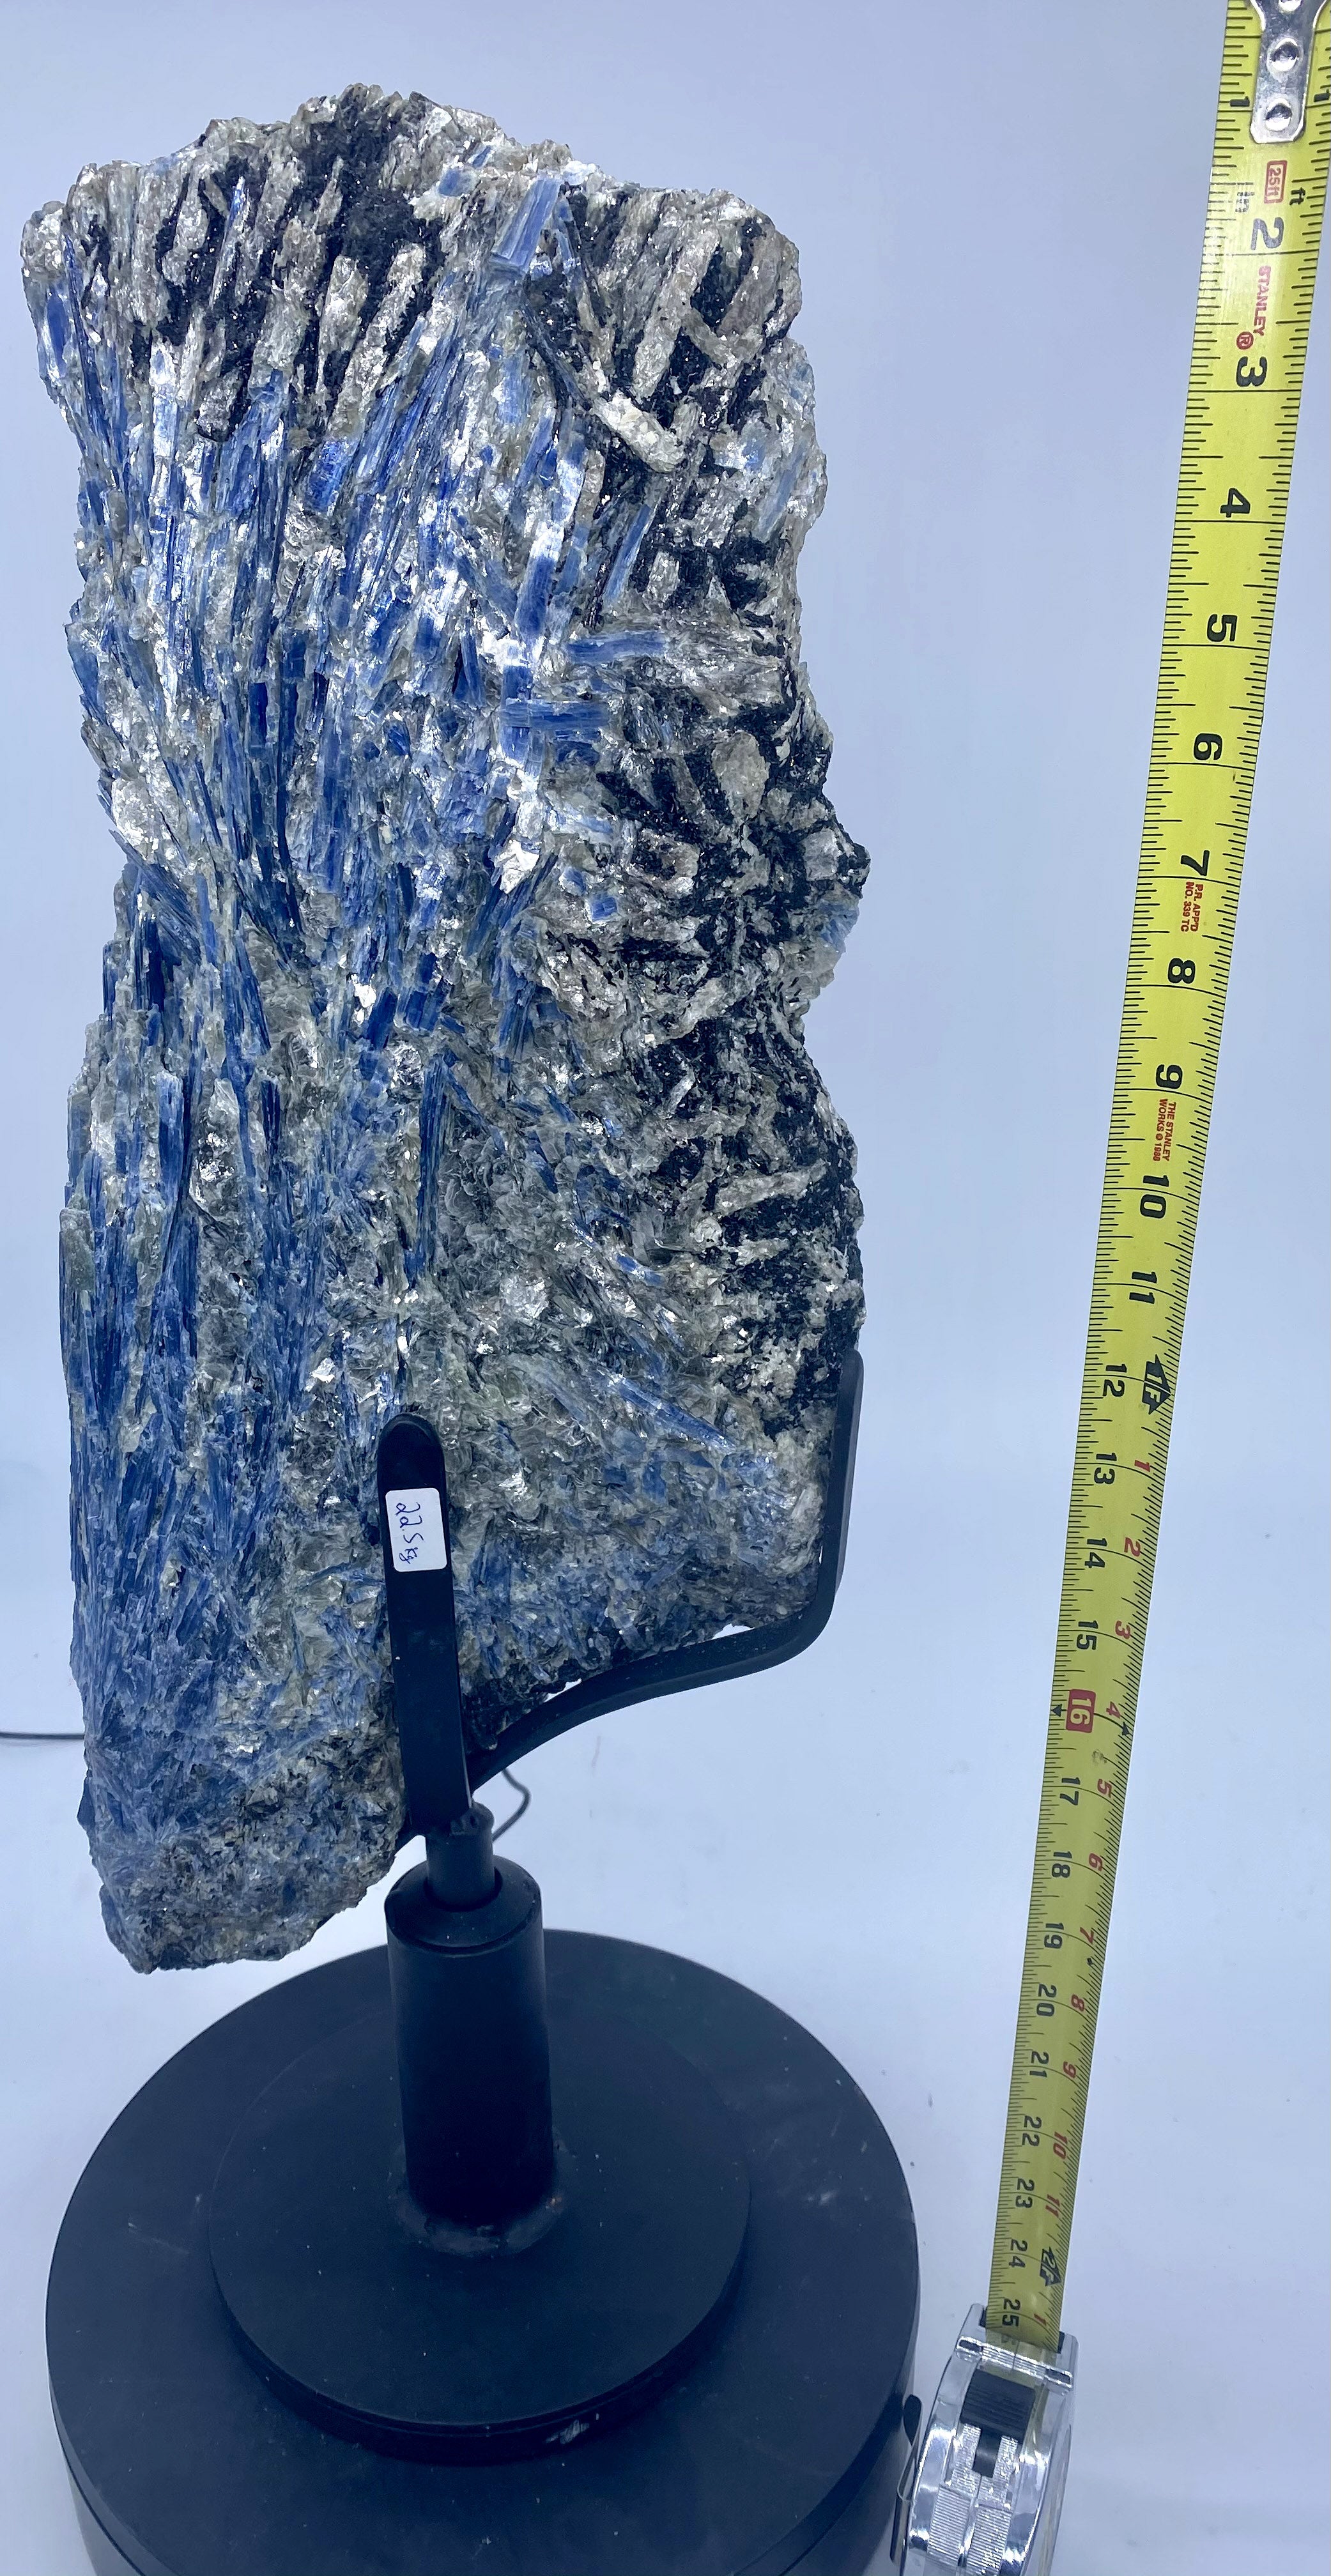 49.6/lbs Blue Kyanite Crystal #041 with clear Quartz, Black Tourmaline and Mica